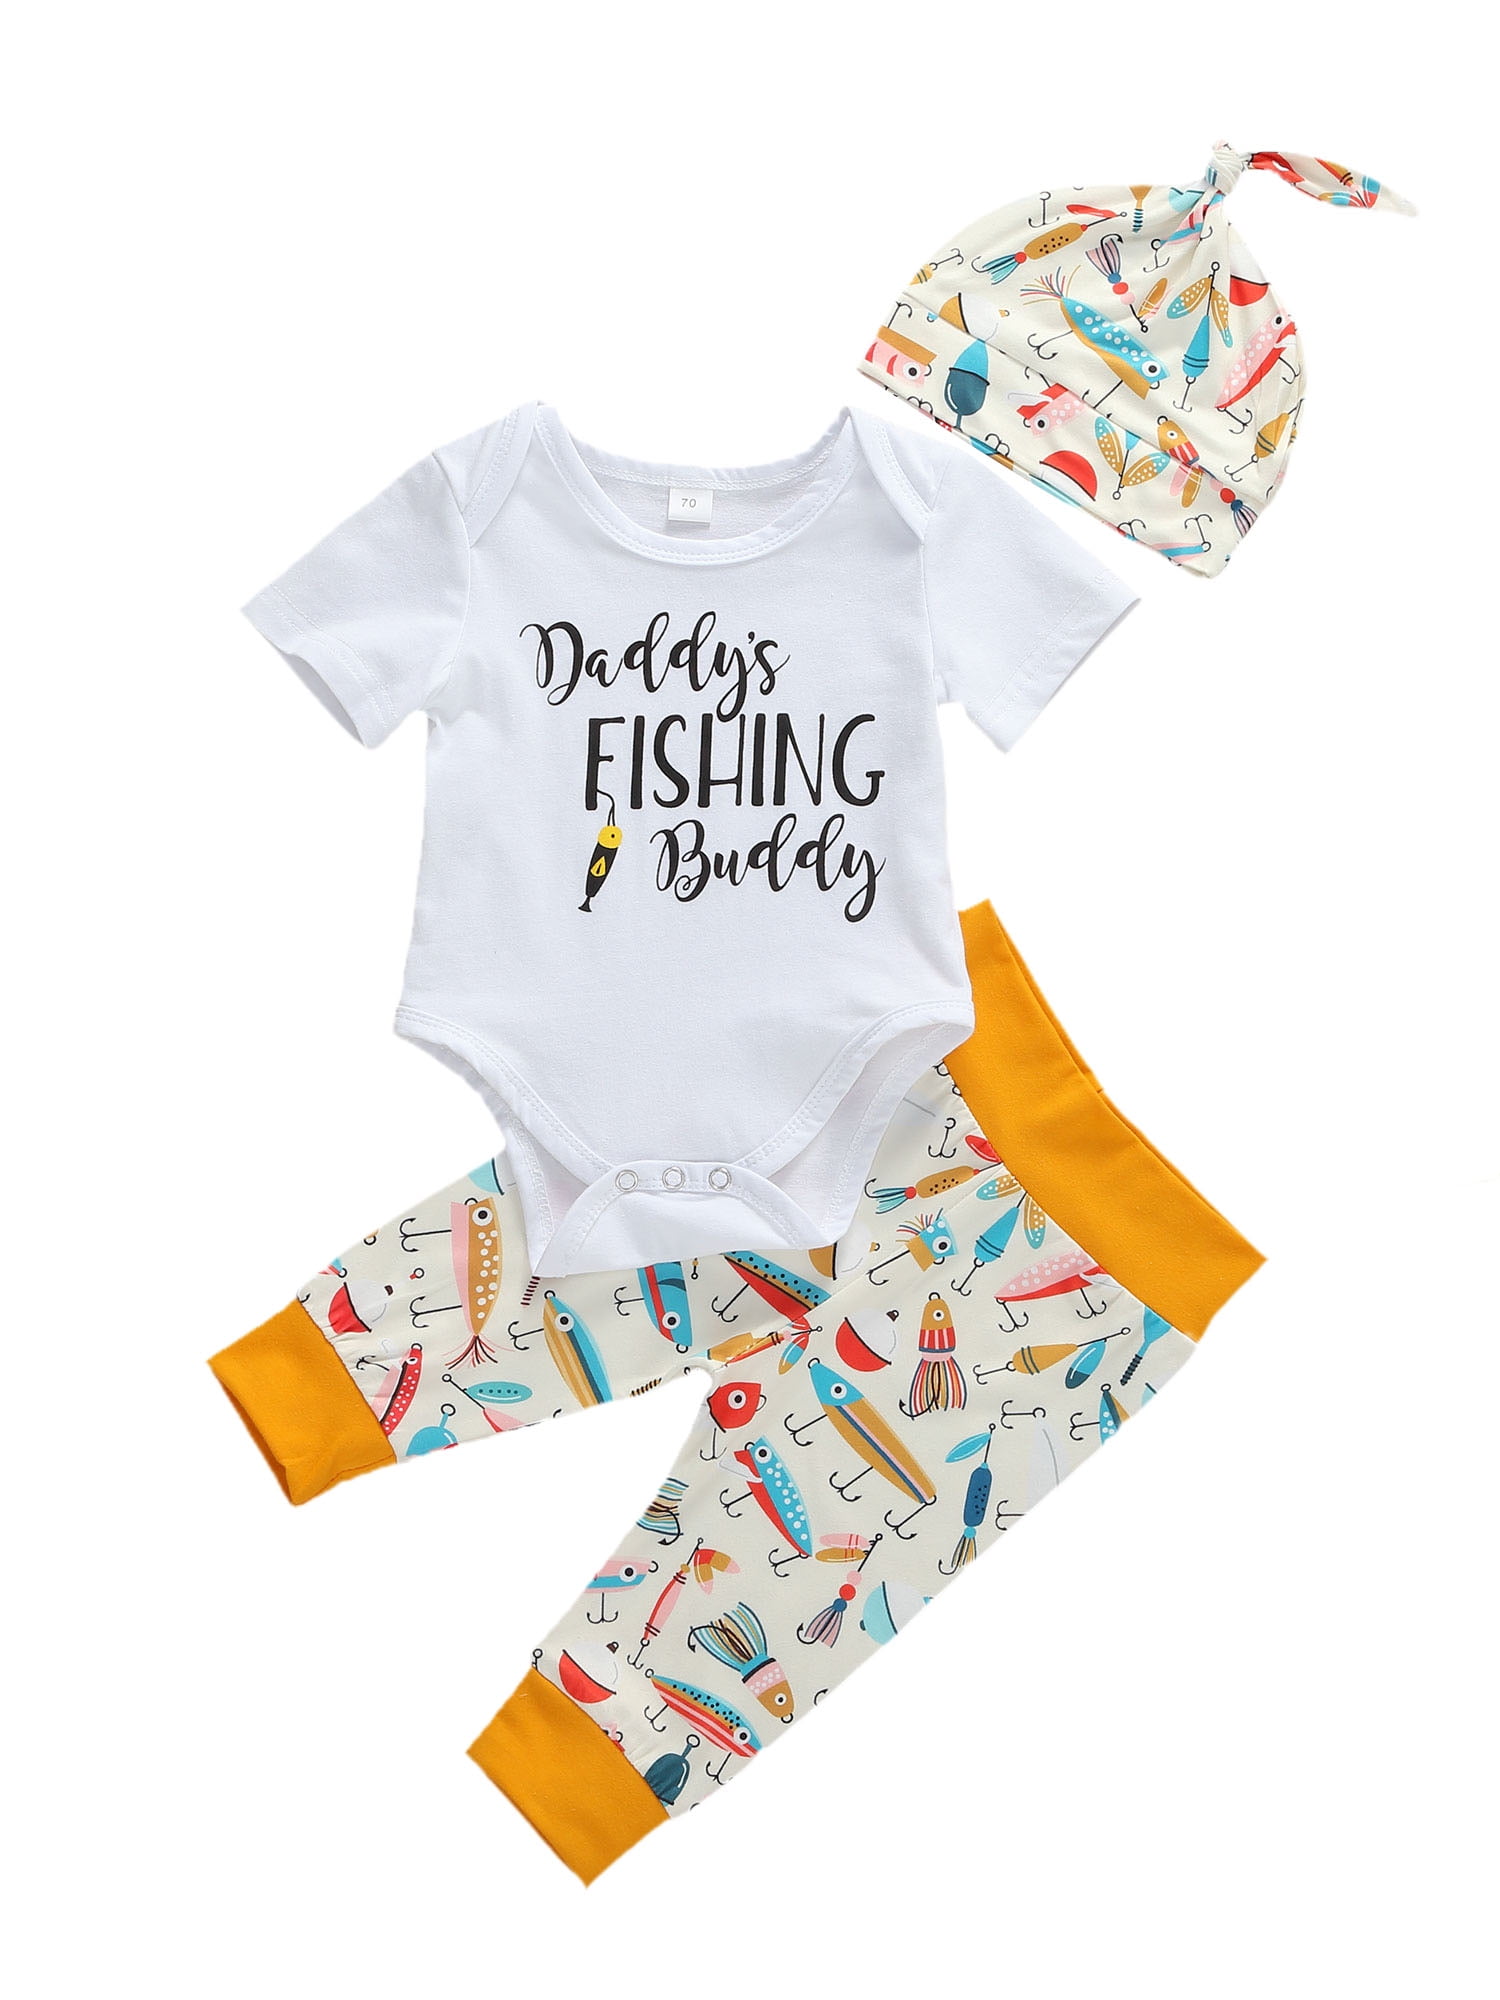 TheFound Newborn Baby Boy Daddy's Fishing Buddy Outfits Short Sleeve Letter  Romper Pants Hat Summer Clothes 